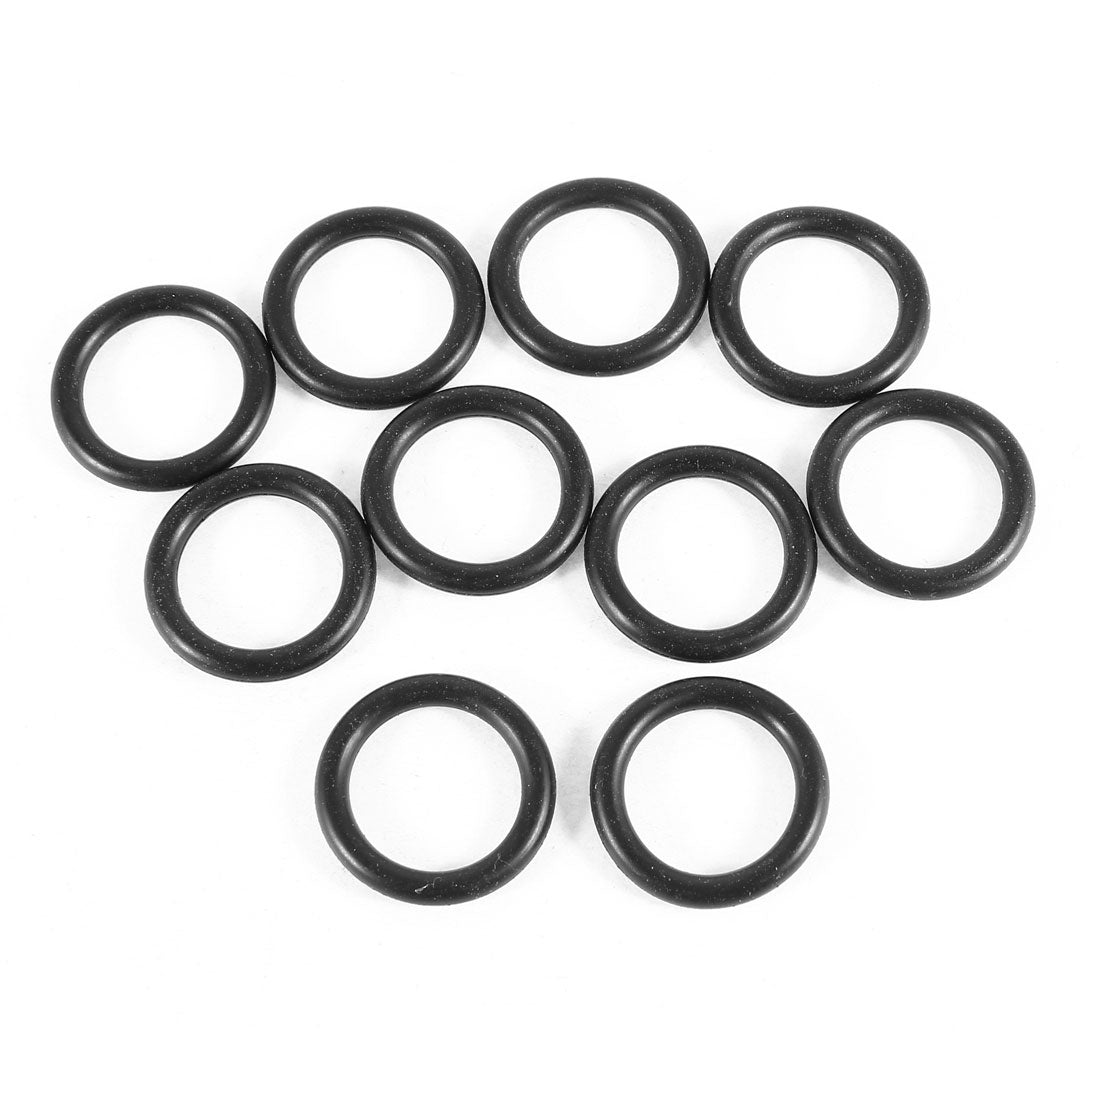 uxcell Uxcell 10 Pcs 27 x 20 x 3.5mm NBR Air Conditioning O Rings Black